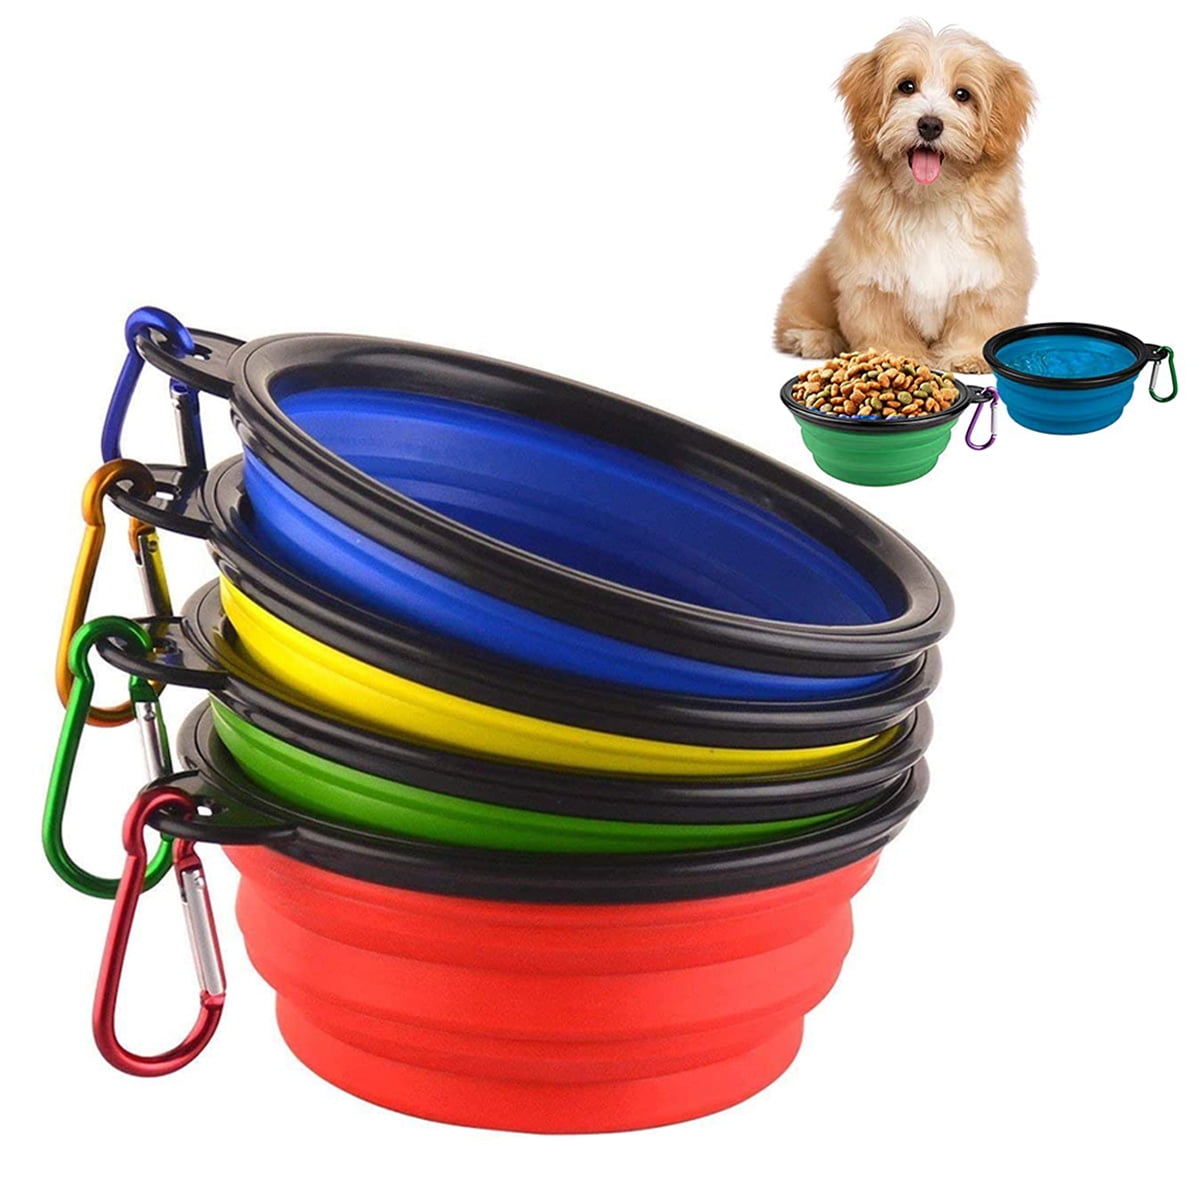 Camping BPA Free Silicone Foldable and Portable Collapsible Hiking Dog Travel Bowls Medium Bowl for Water and Food Puppy or Pet Ideal When Walking Travelling or just Outdoors with Your Cat 